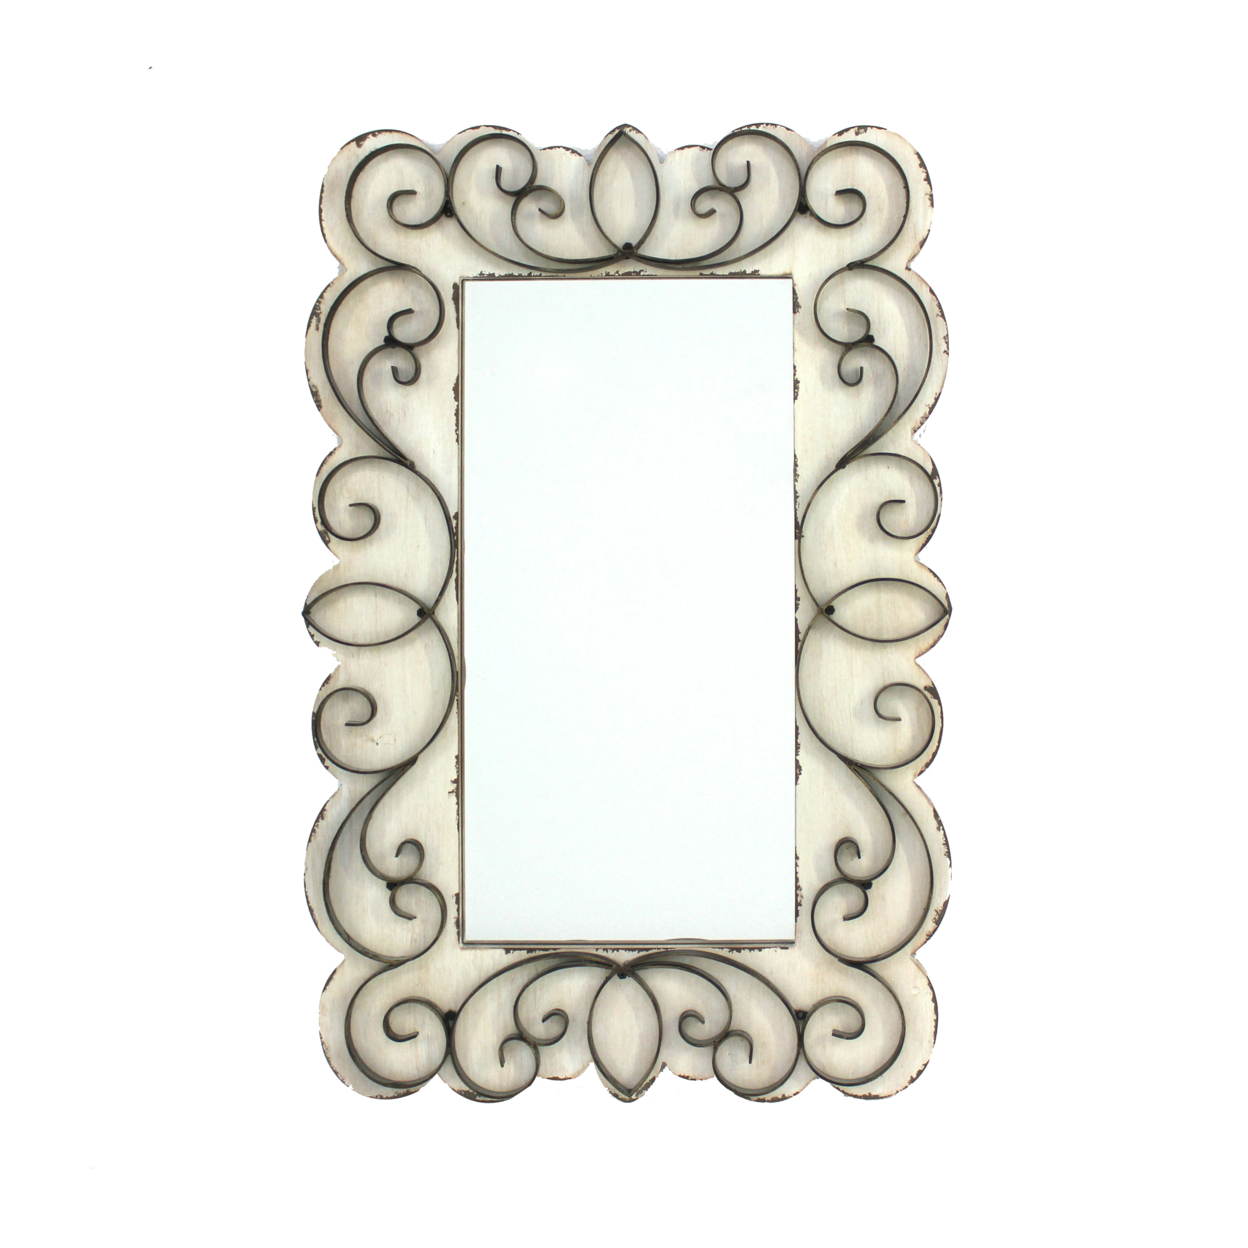 Rectangular Wall Mirror With Wooden Frame And Metal Scrolled Edges, White- Saltoro Sherpi